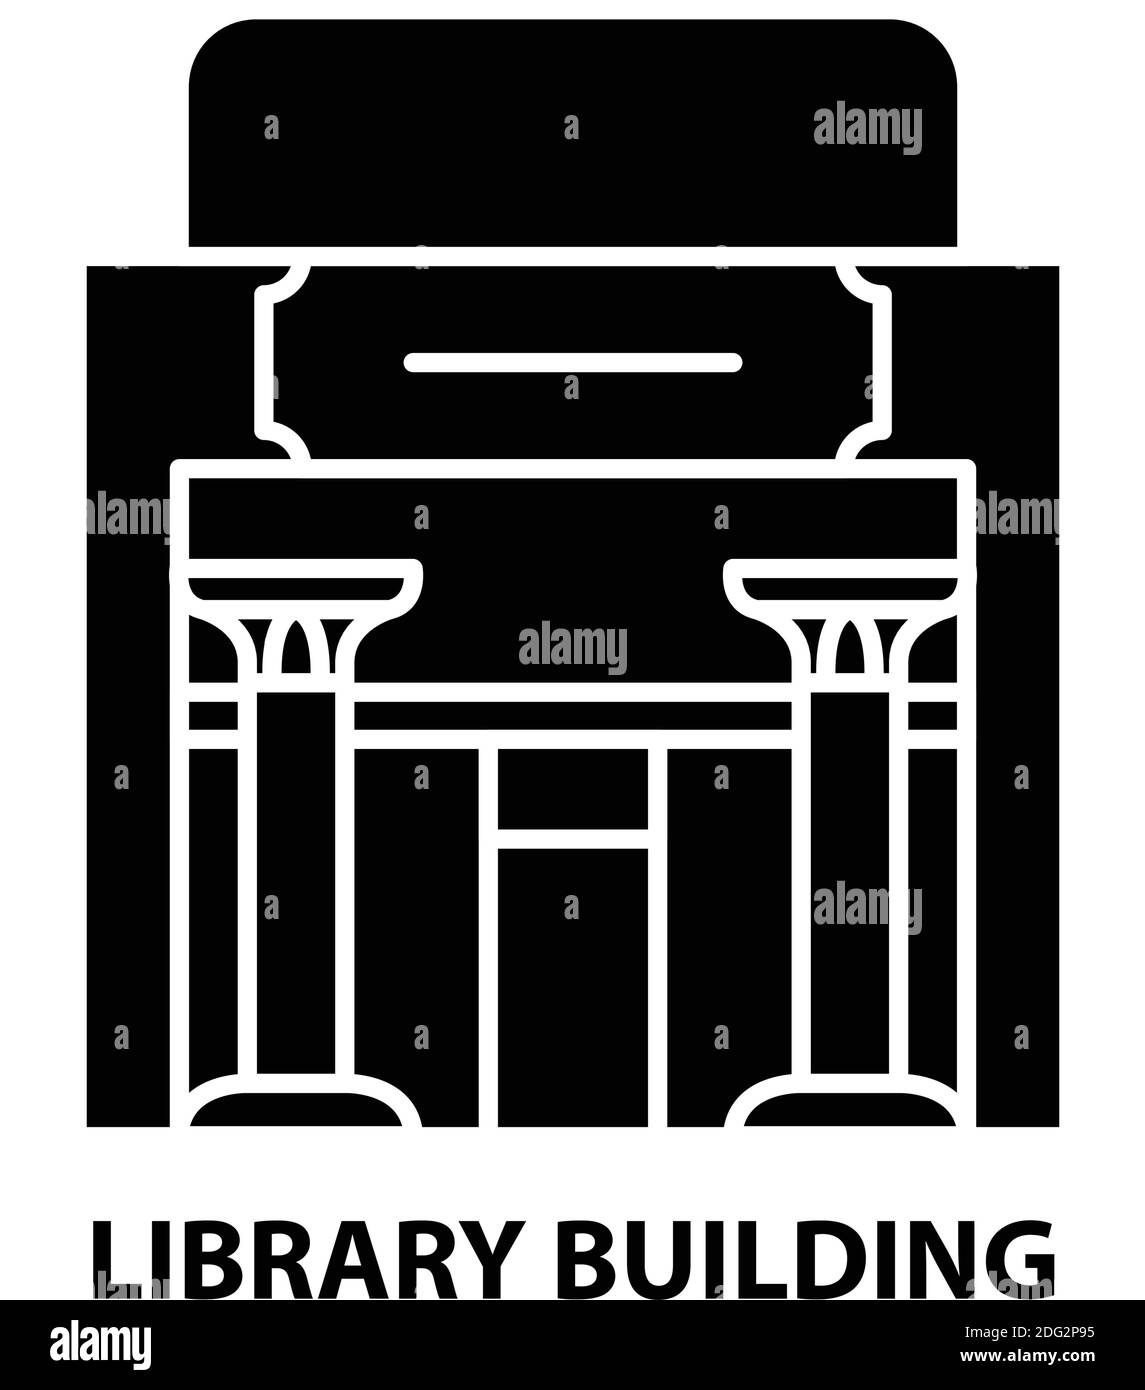 library building icon, black vector sign with editable strokes, concept illustration Stock Vector